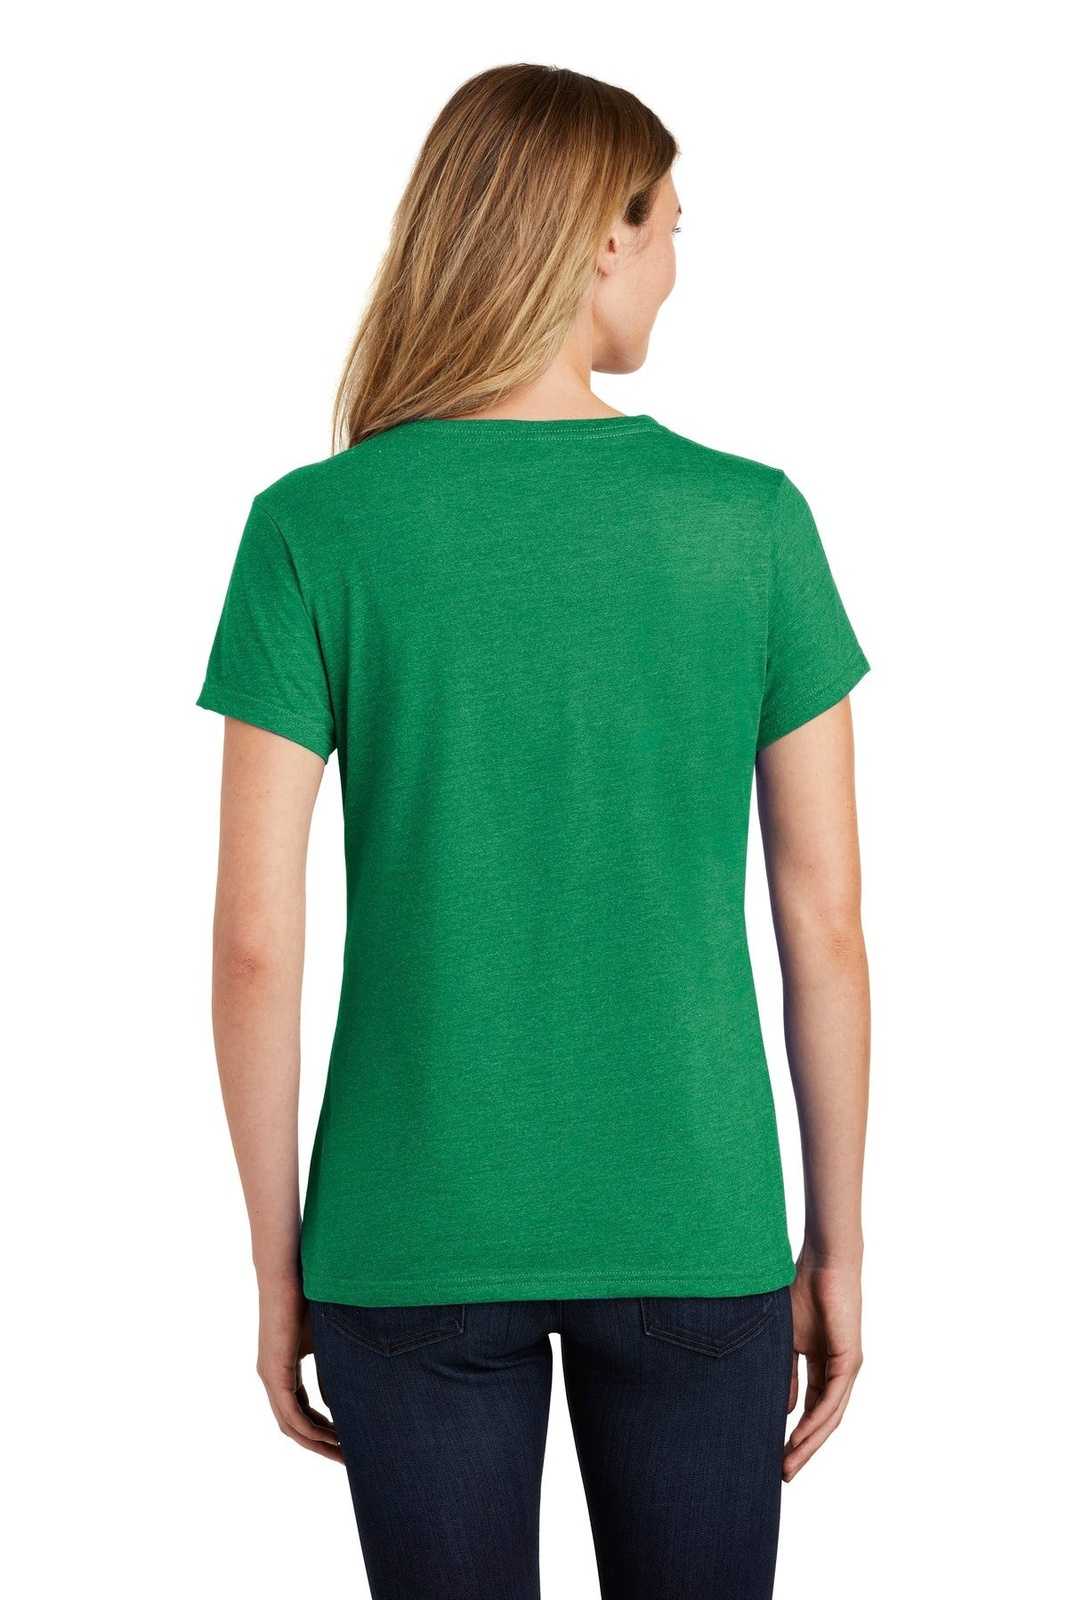 Port &amp; Company LPC455V Ladies Fan Favorite Blend V-Neck Tee - Athletic Kelly Green Heather - HIT a Double - 2